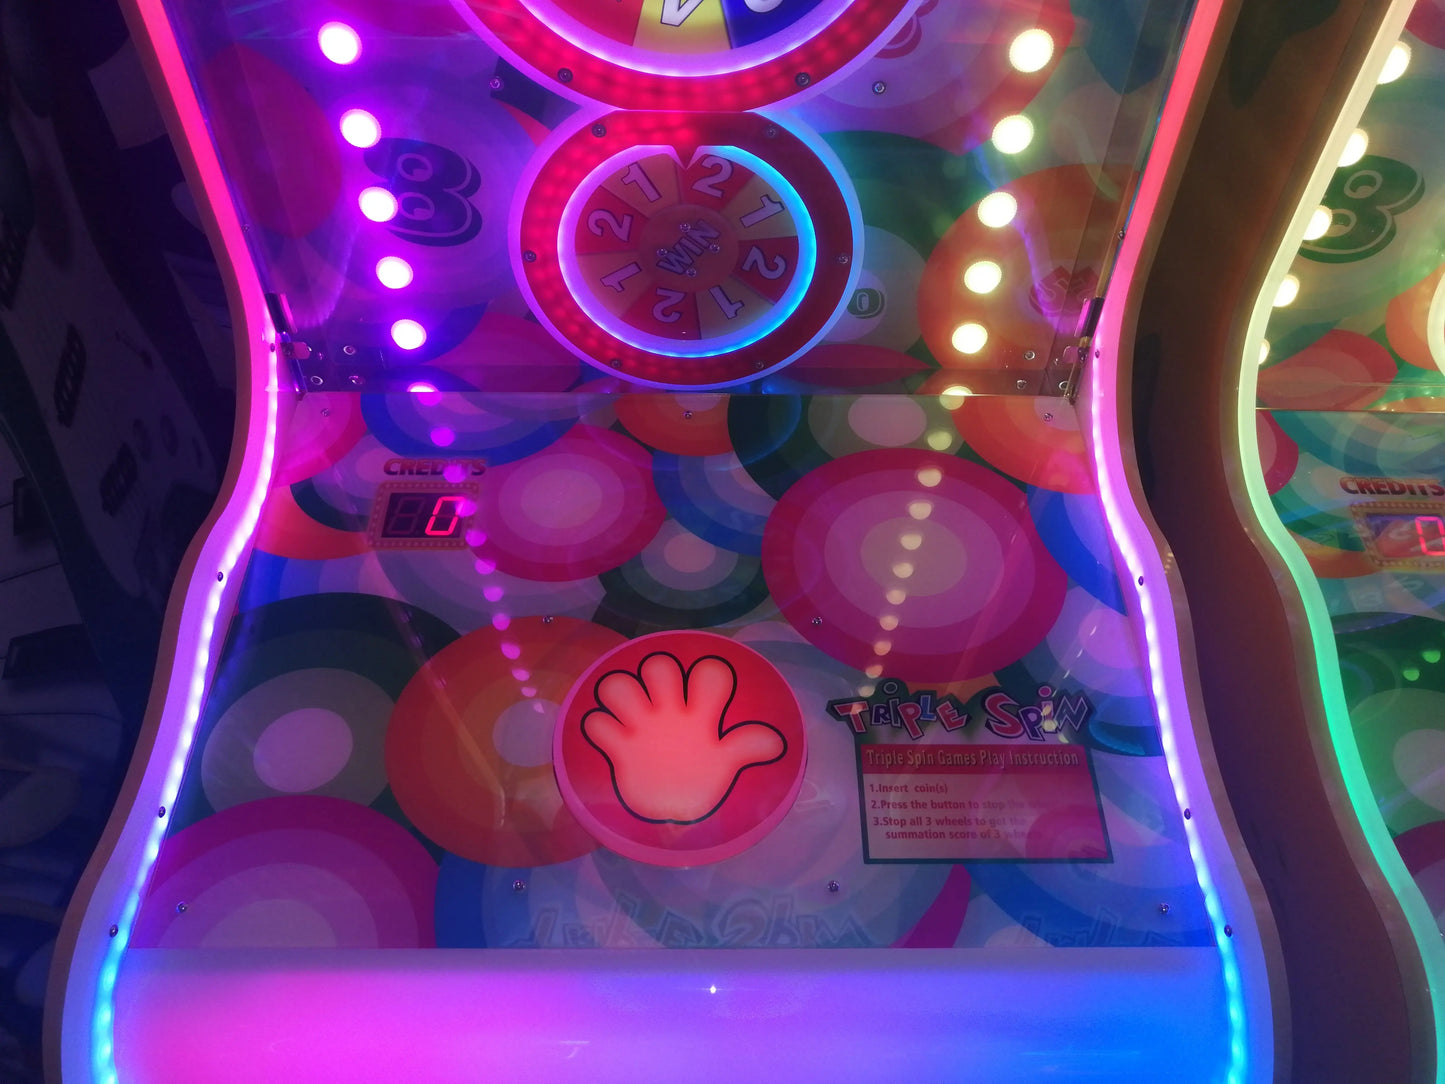 Triple-Spin-Lottery-Redemption-game-machine-Amusement-Coin-Operated-Ticket-Redemption-Electronic-games-Tomy-Arcade